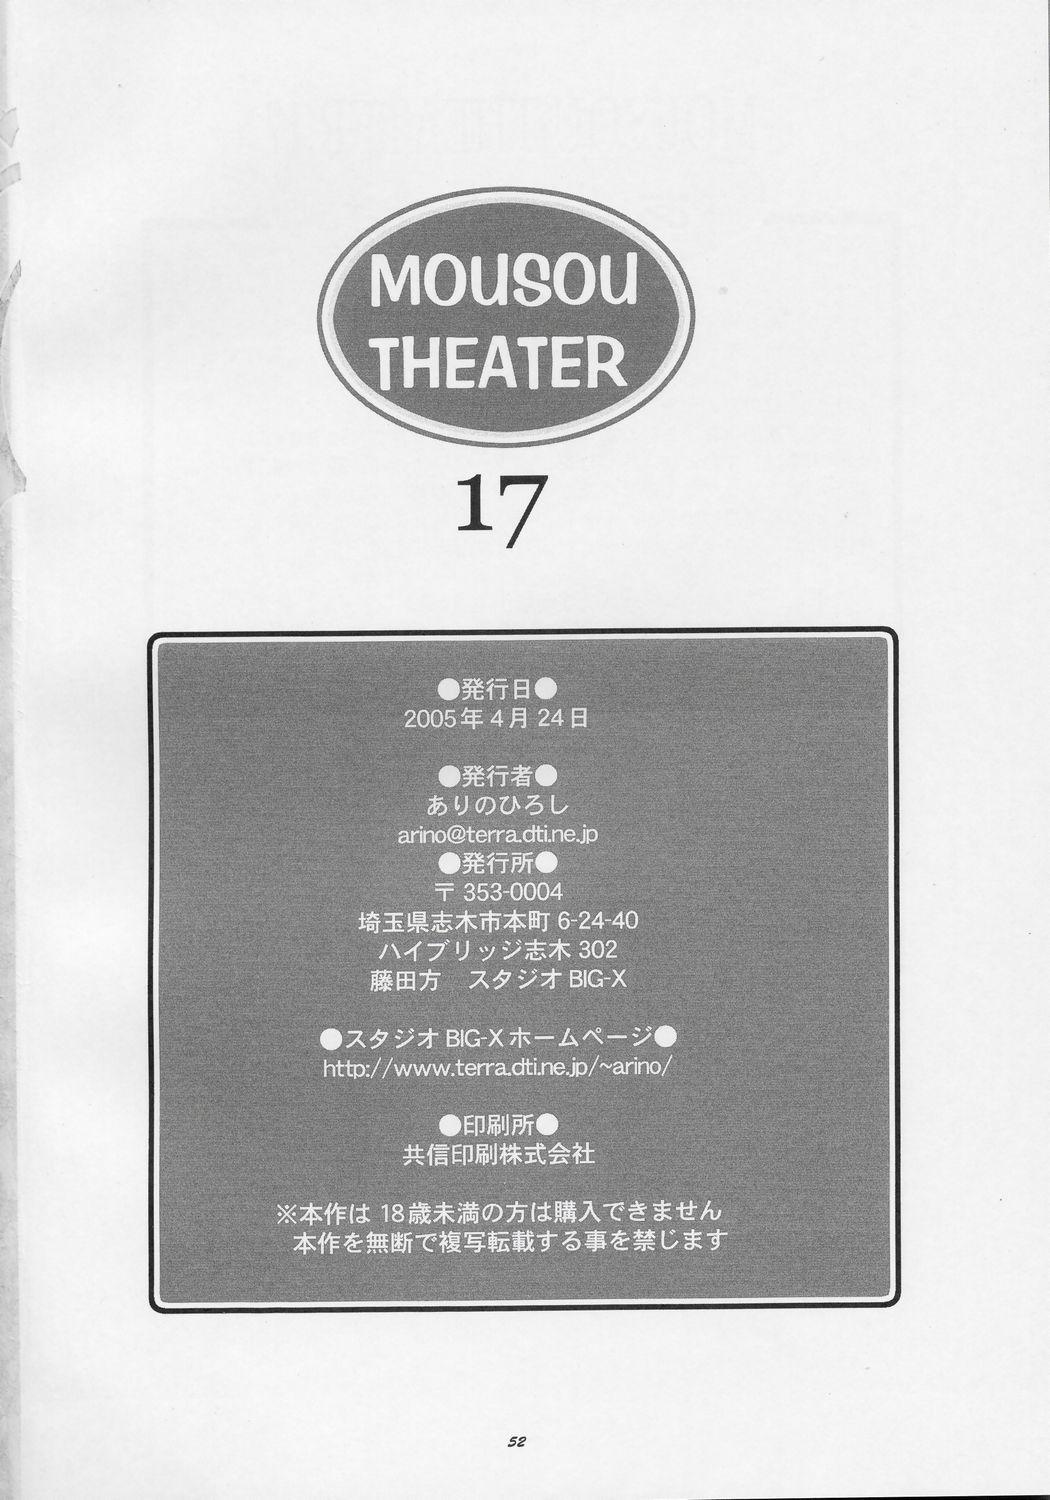 MOUSOU THEATER 17 50